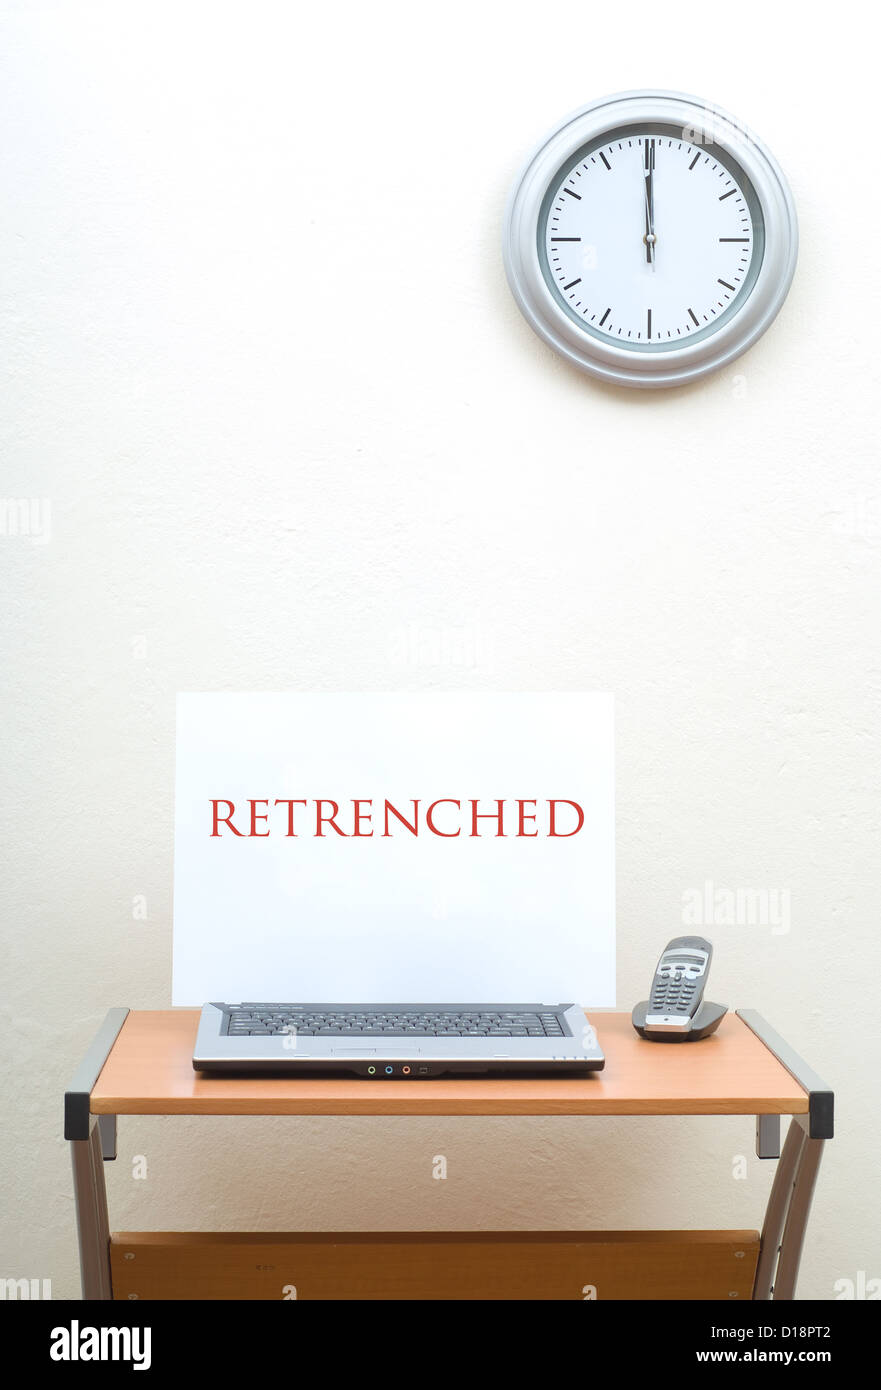 Office Desk With Retrenched Sign On Open Laptop Nest To Phone